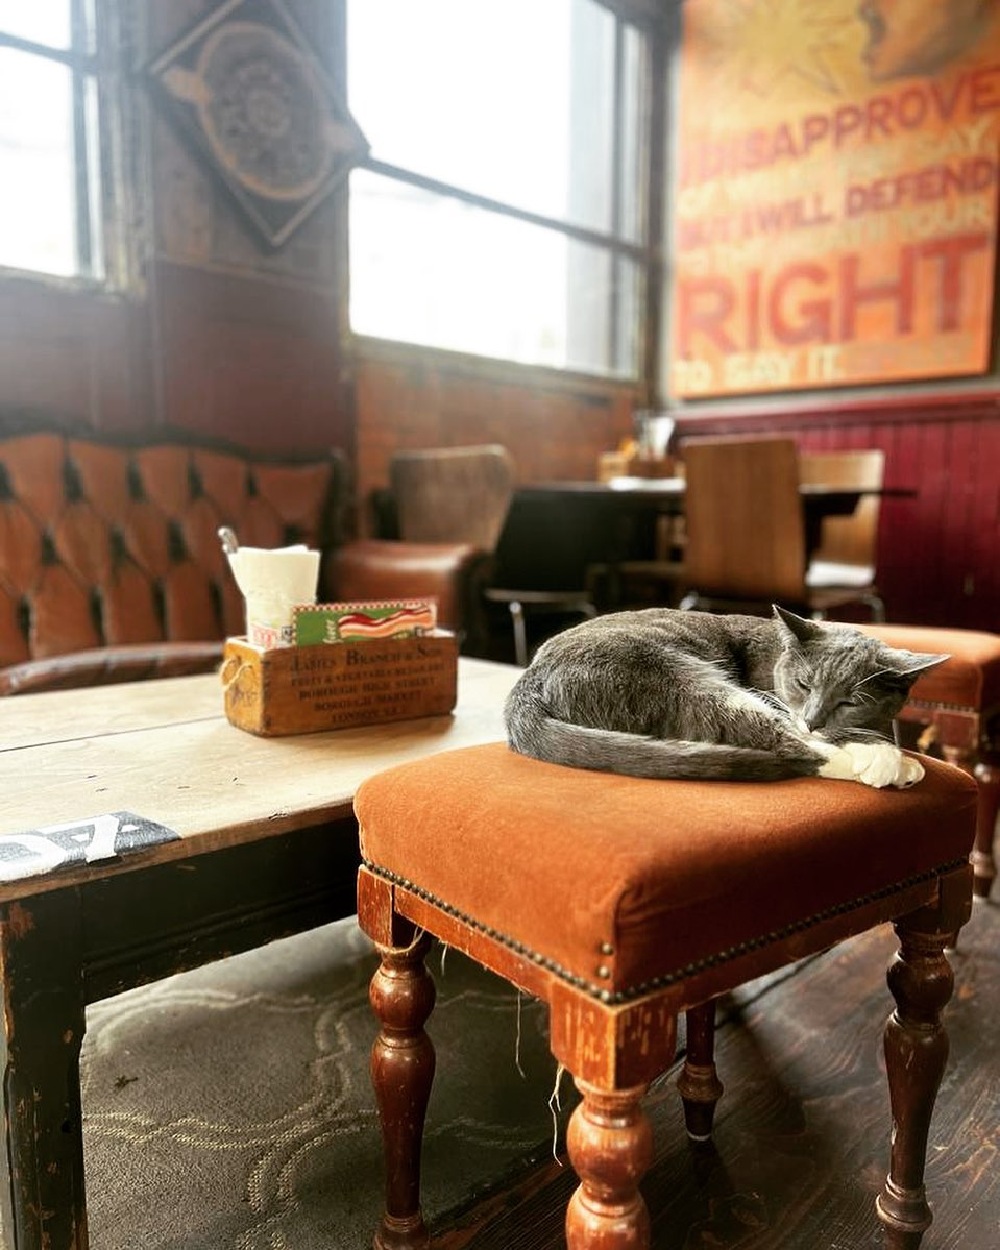 Top 10 Pet-Friendly Restaurants in London That You and Your Furry Friend Will Love